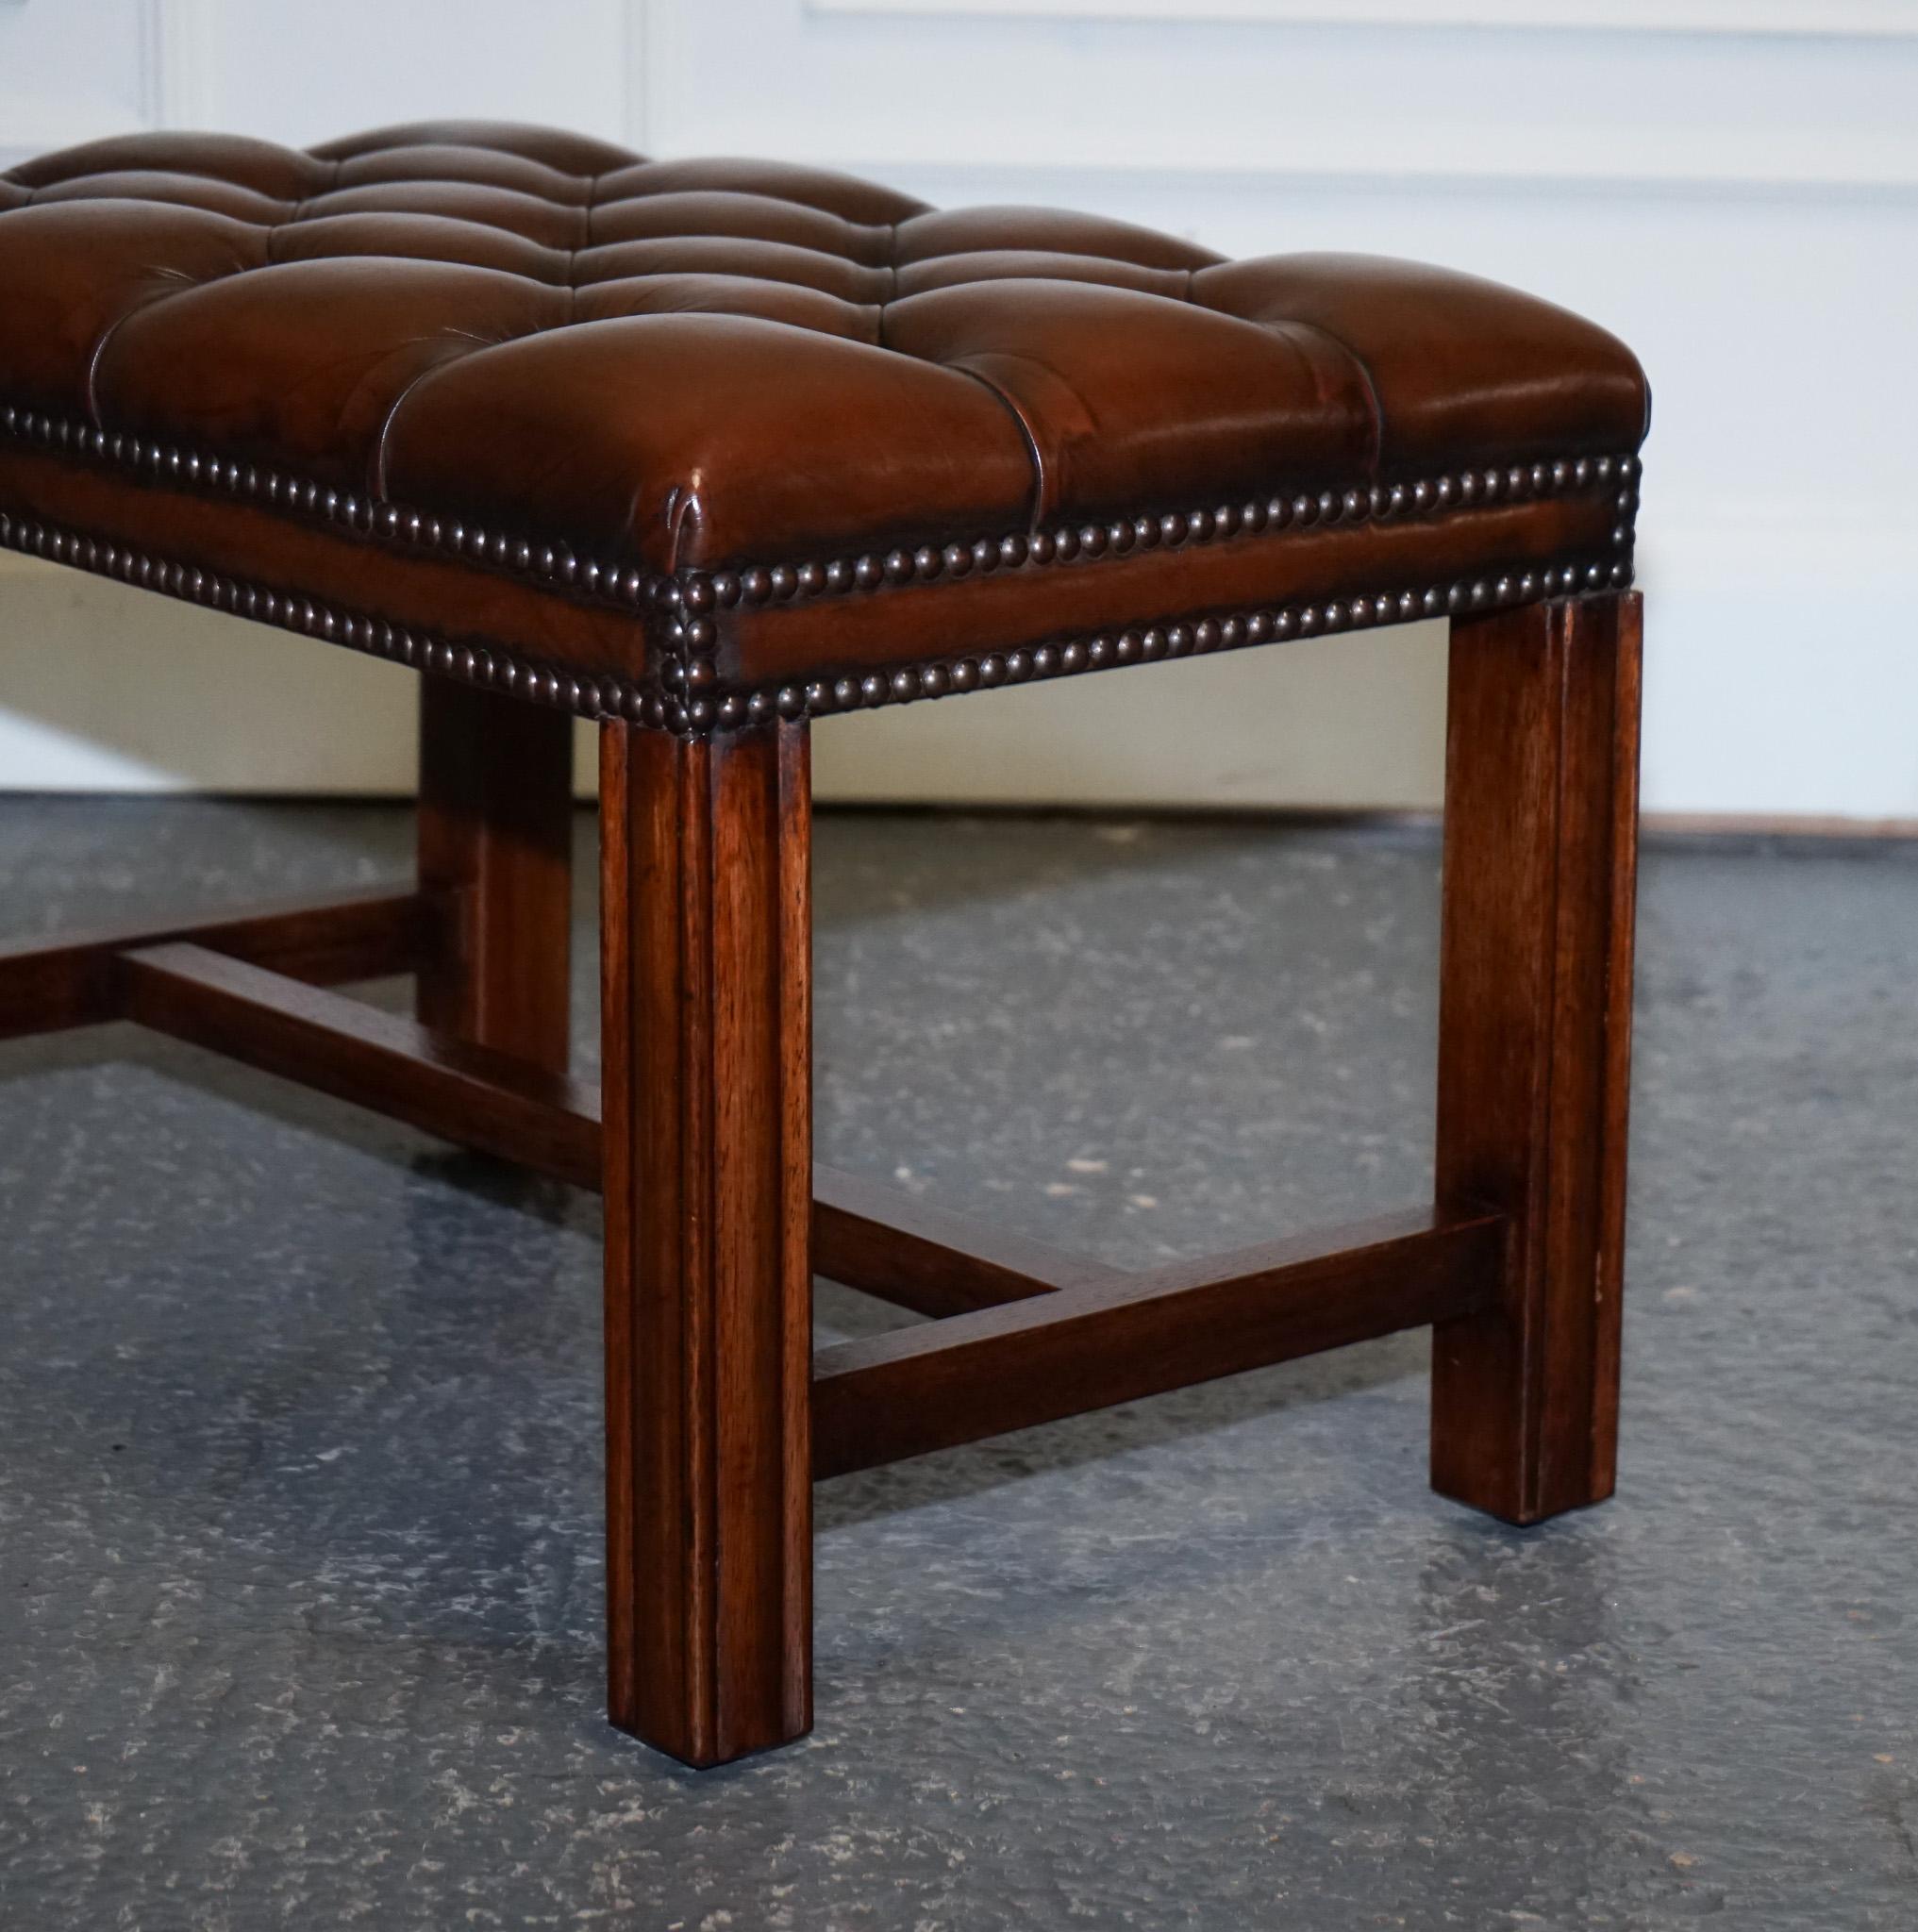 British VINTAGE RESTORED CHESTERFiELD HAND DYED BROWN LEATHER TUFFED FOOTSTOOL (1/2) For Sale